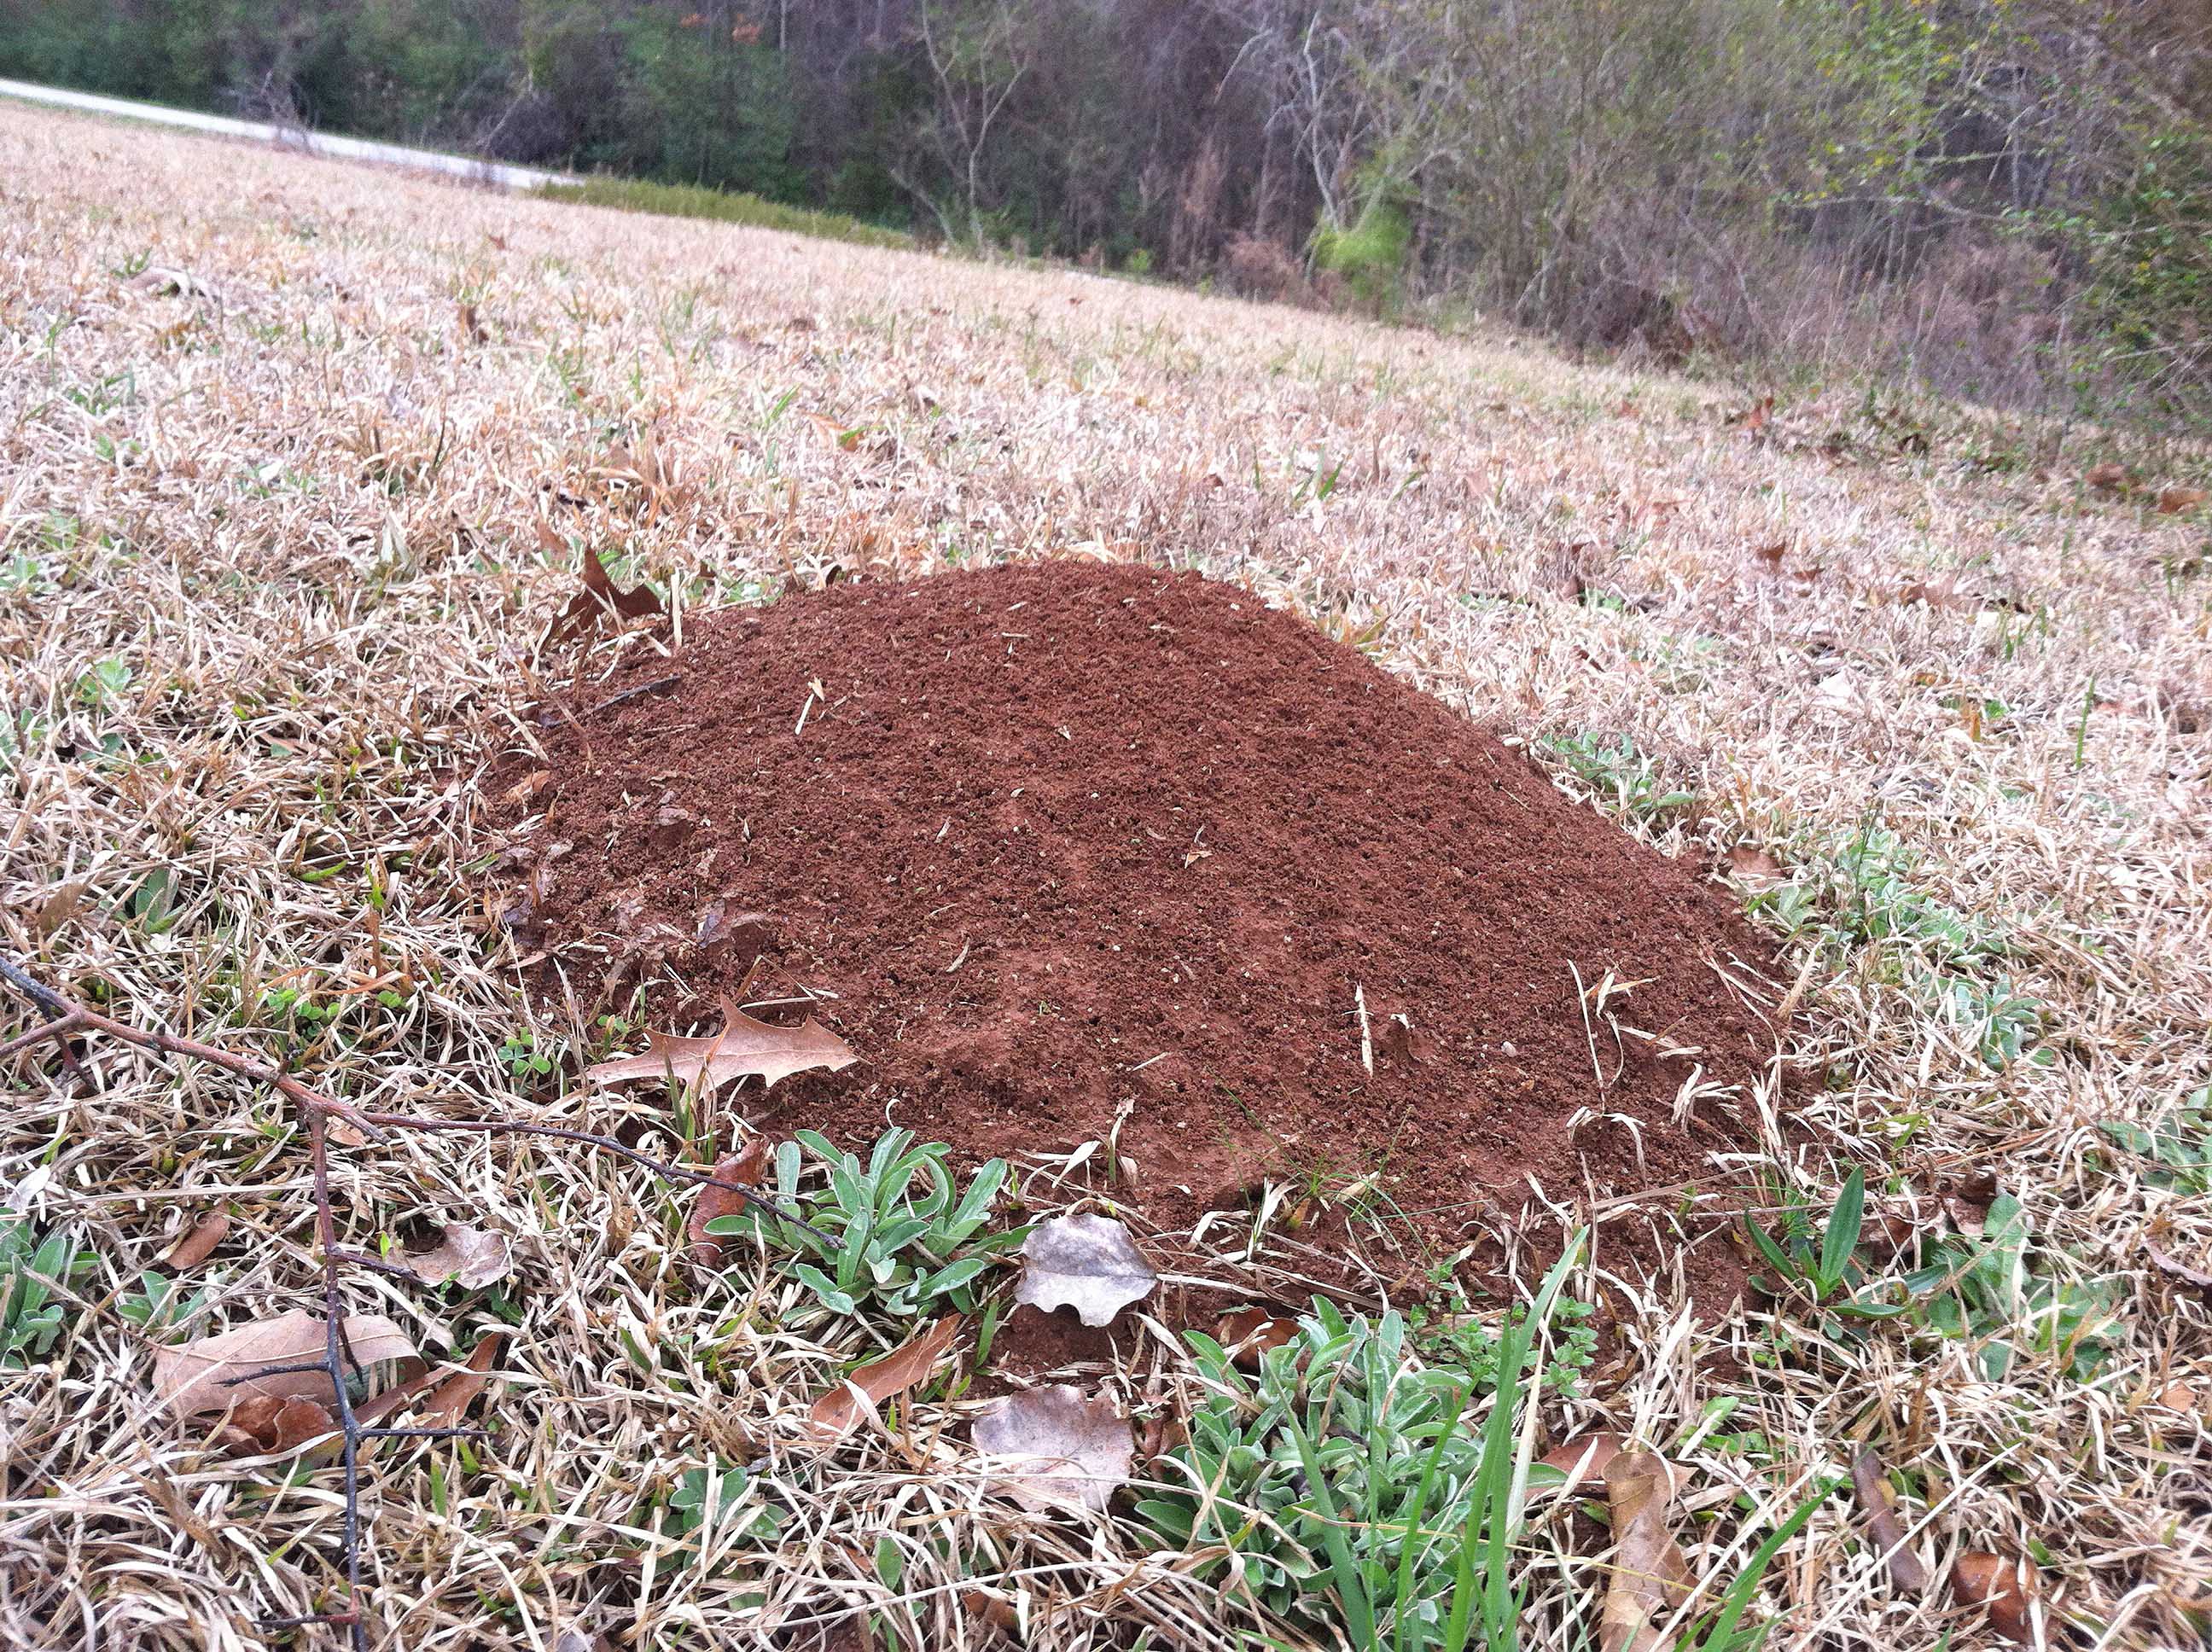 Don't let fire ants ruin your afternoons.